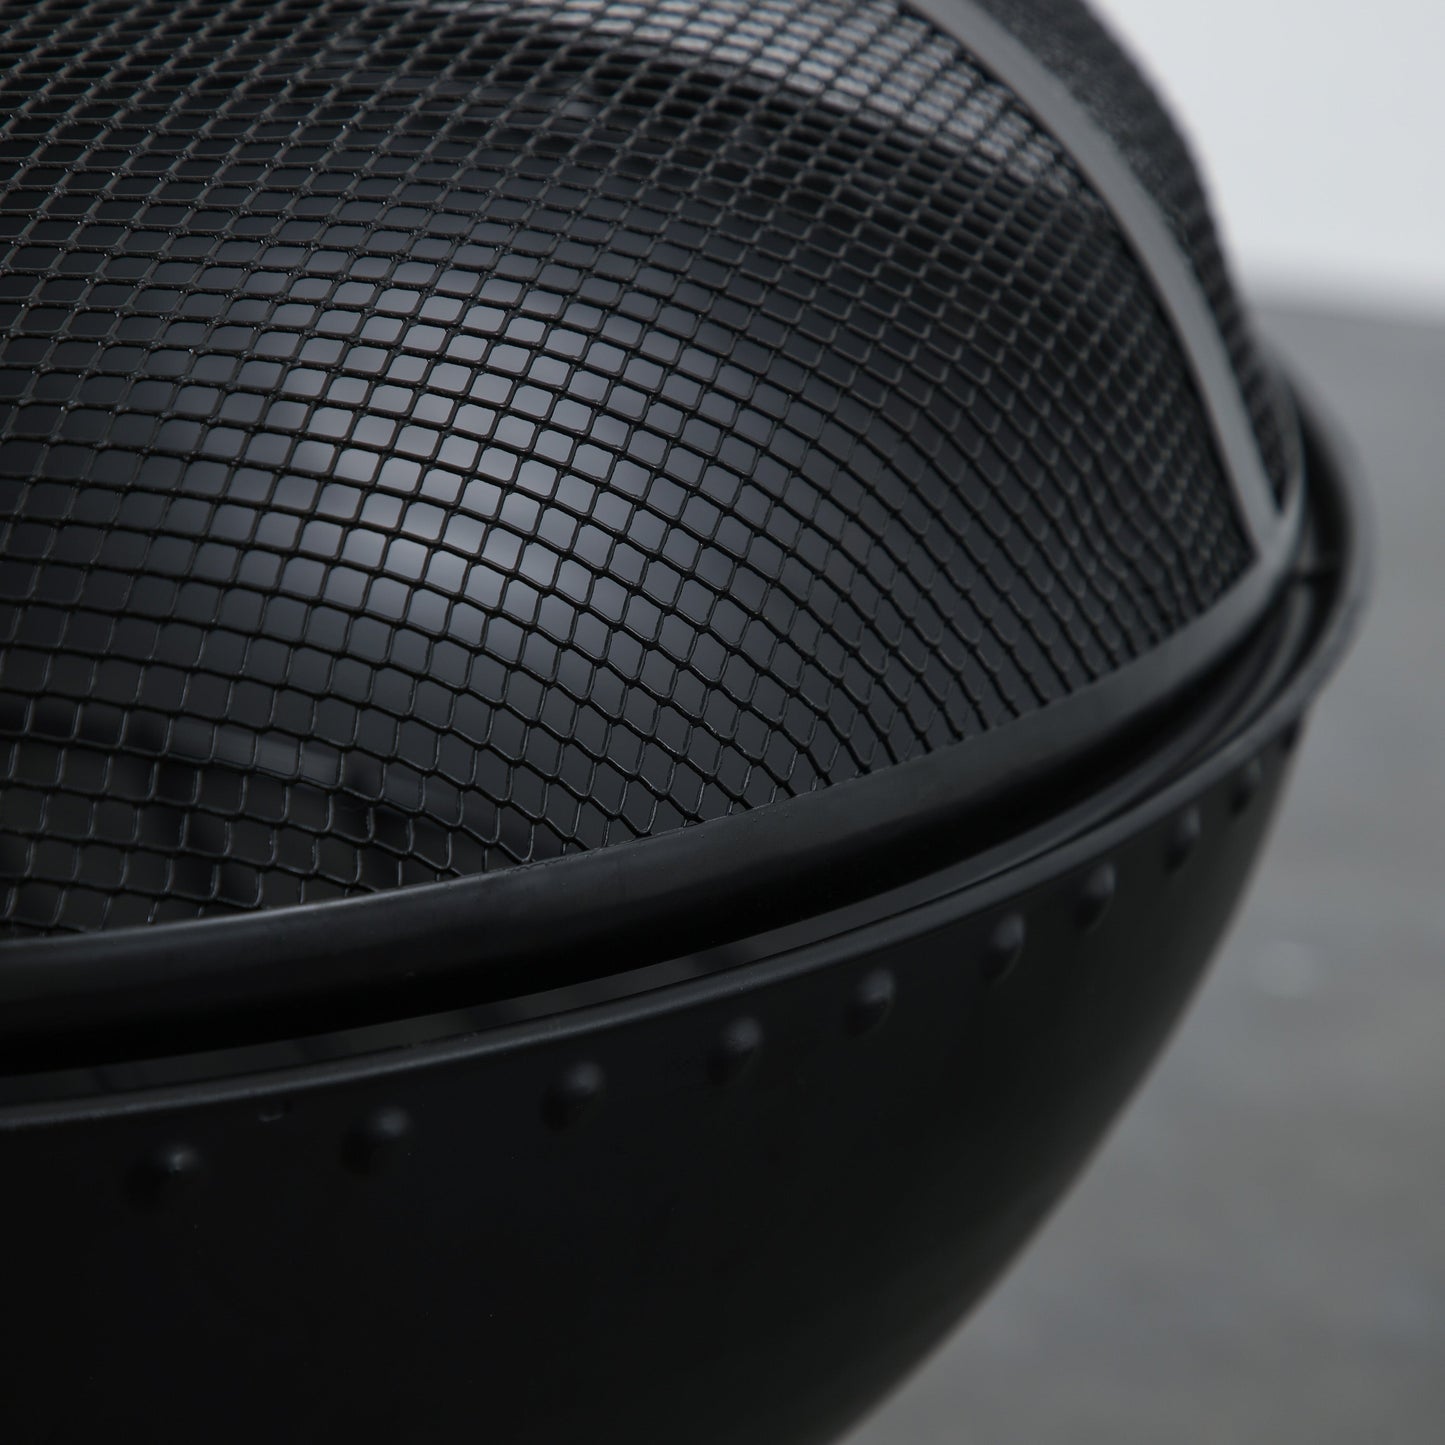 A close-up of the Kikiathome.co.uk Diptford Firepit, a black mesh fire pit perfect for home furniture or interior decor.